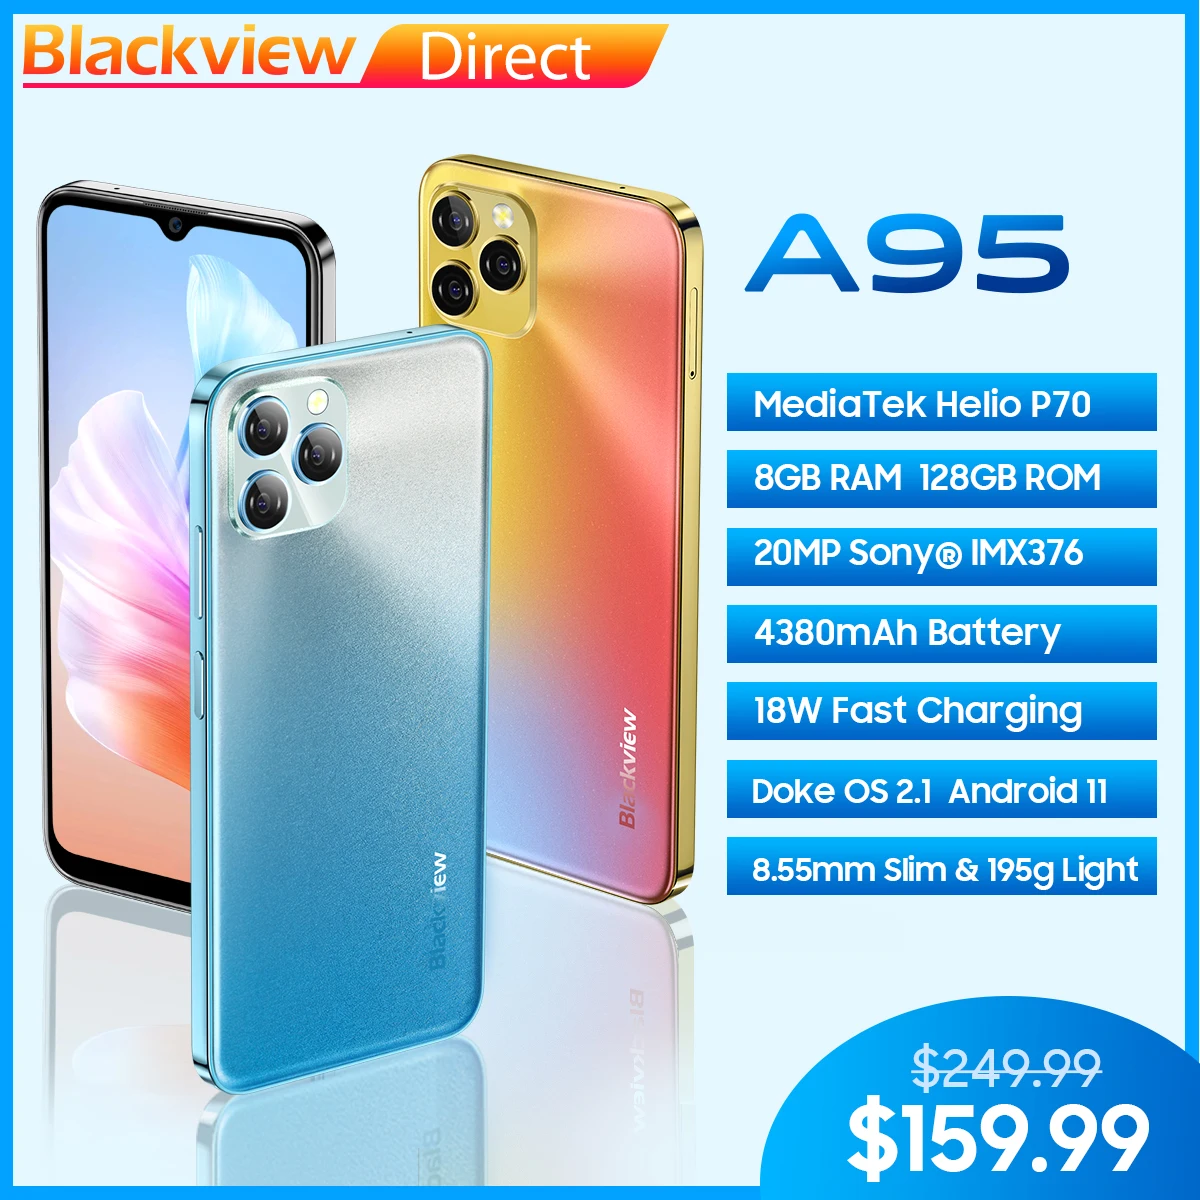 

Blackview A95 Smartphone Helio P70 Octa Core Android 11 Mobile Phone 8GB+128GB 6.528" HD+ Display 20MP Camera 4380mAh Cellphone